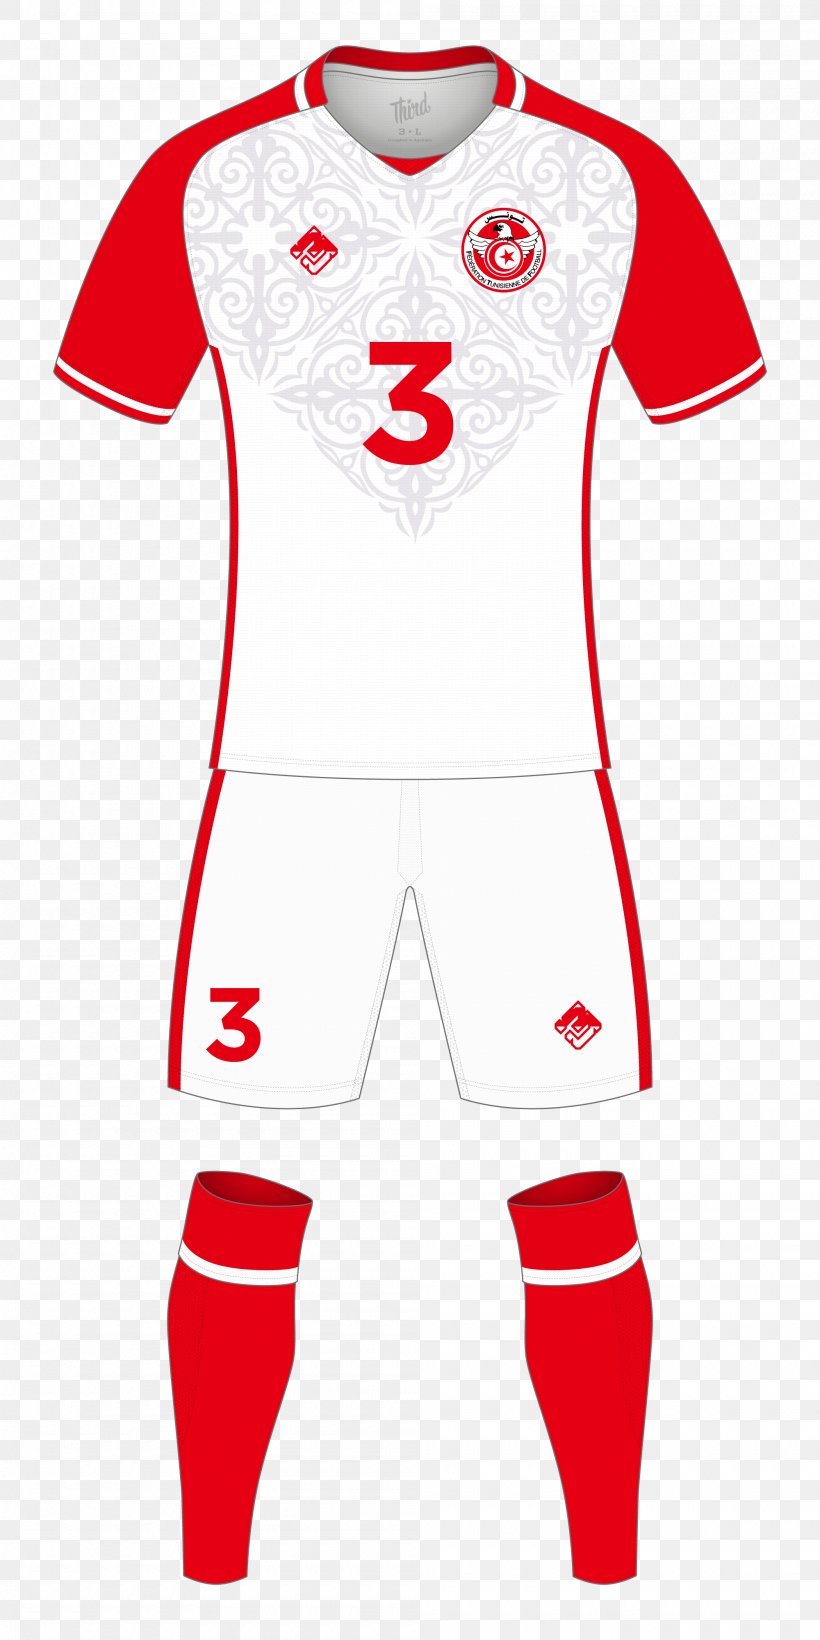 2018 World Cup Croatia National Football Team Senegal National Football Team South Korea National Football Team Tunisia National Football Team, PNG, 2000x4000px, 2018 World Cup, Argentina National Football Team, Baby Toddler Clothing, Clothing, Colombia National Football Team Download Free